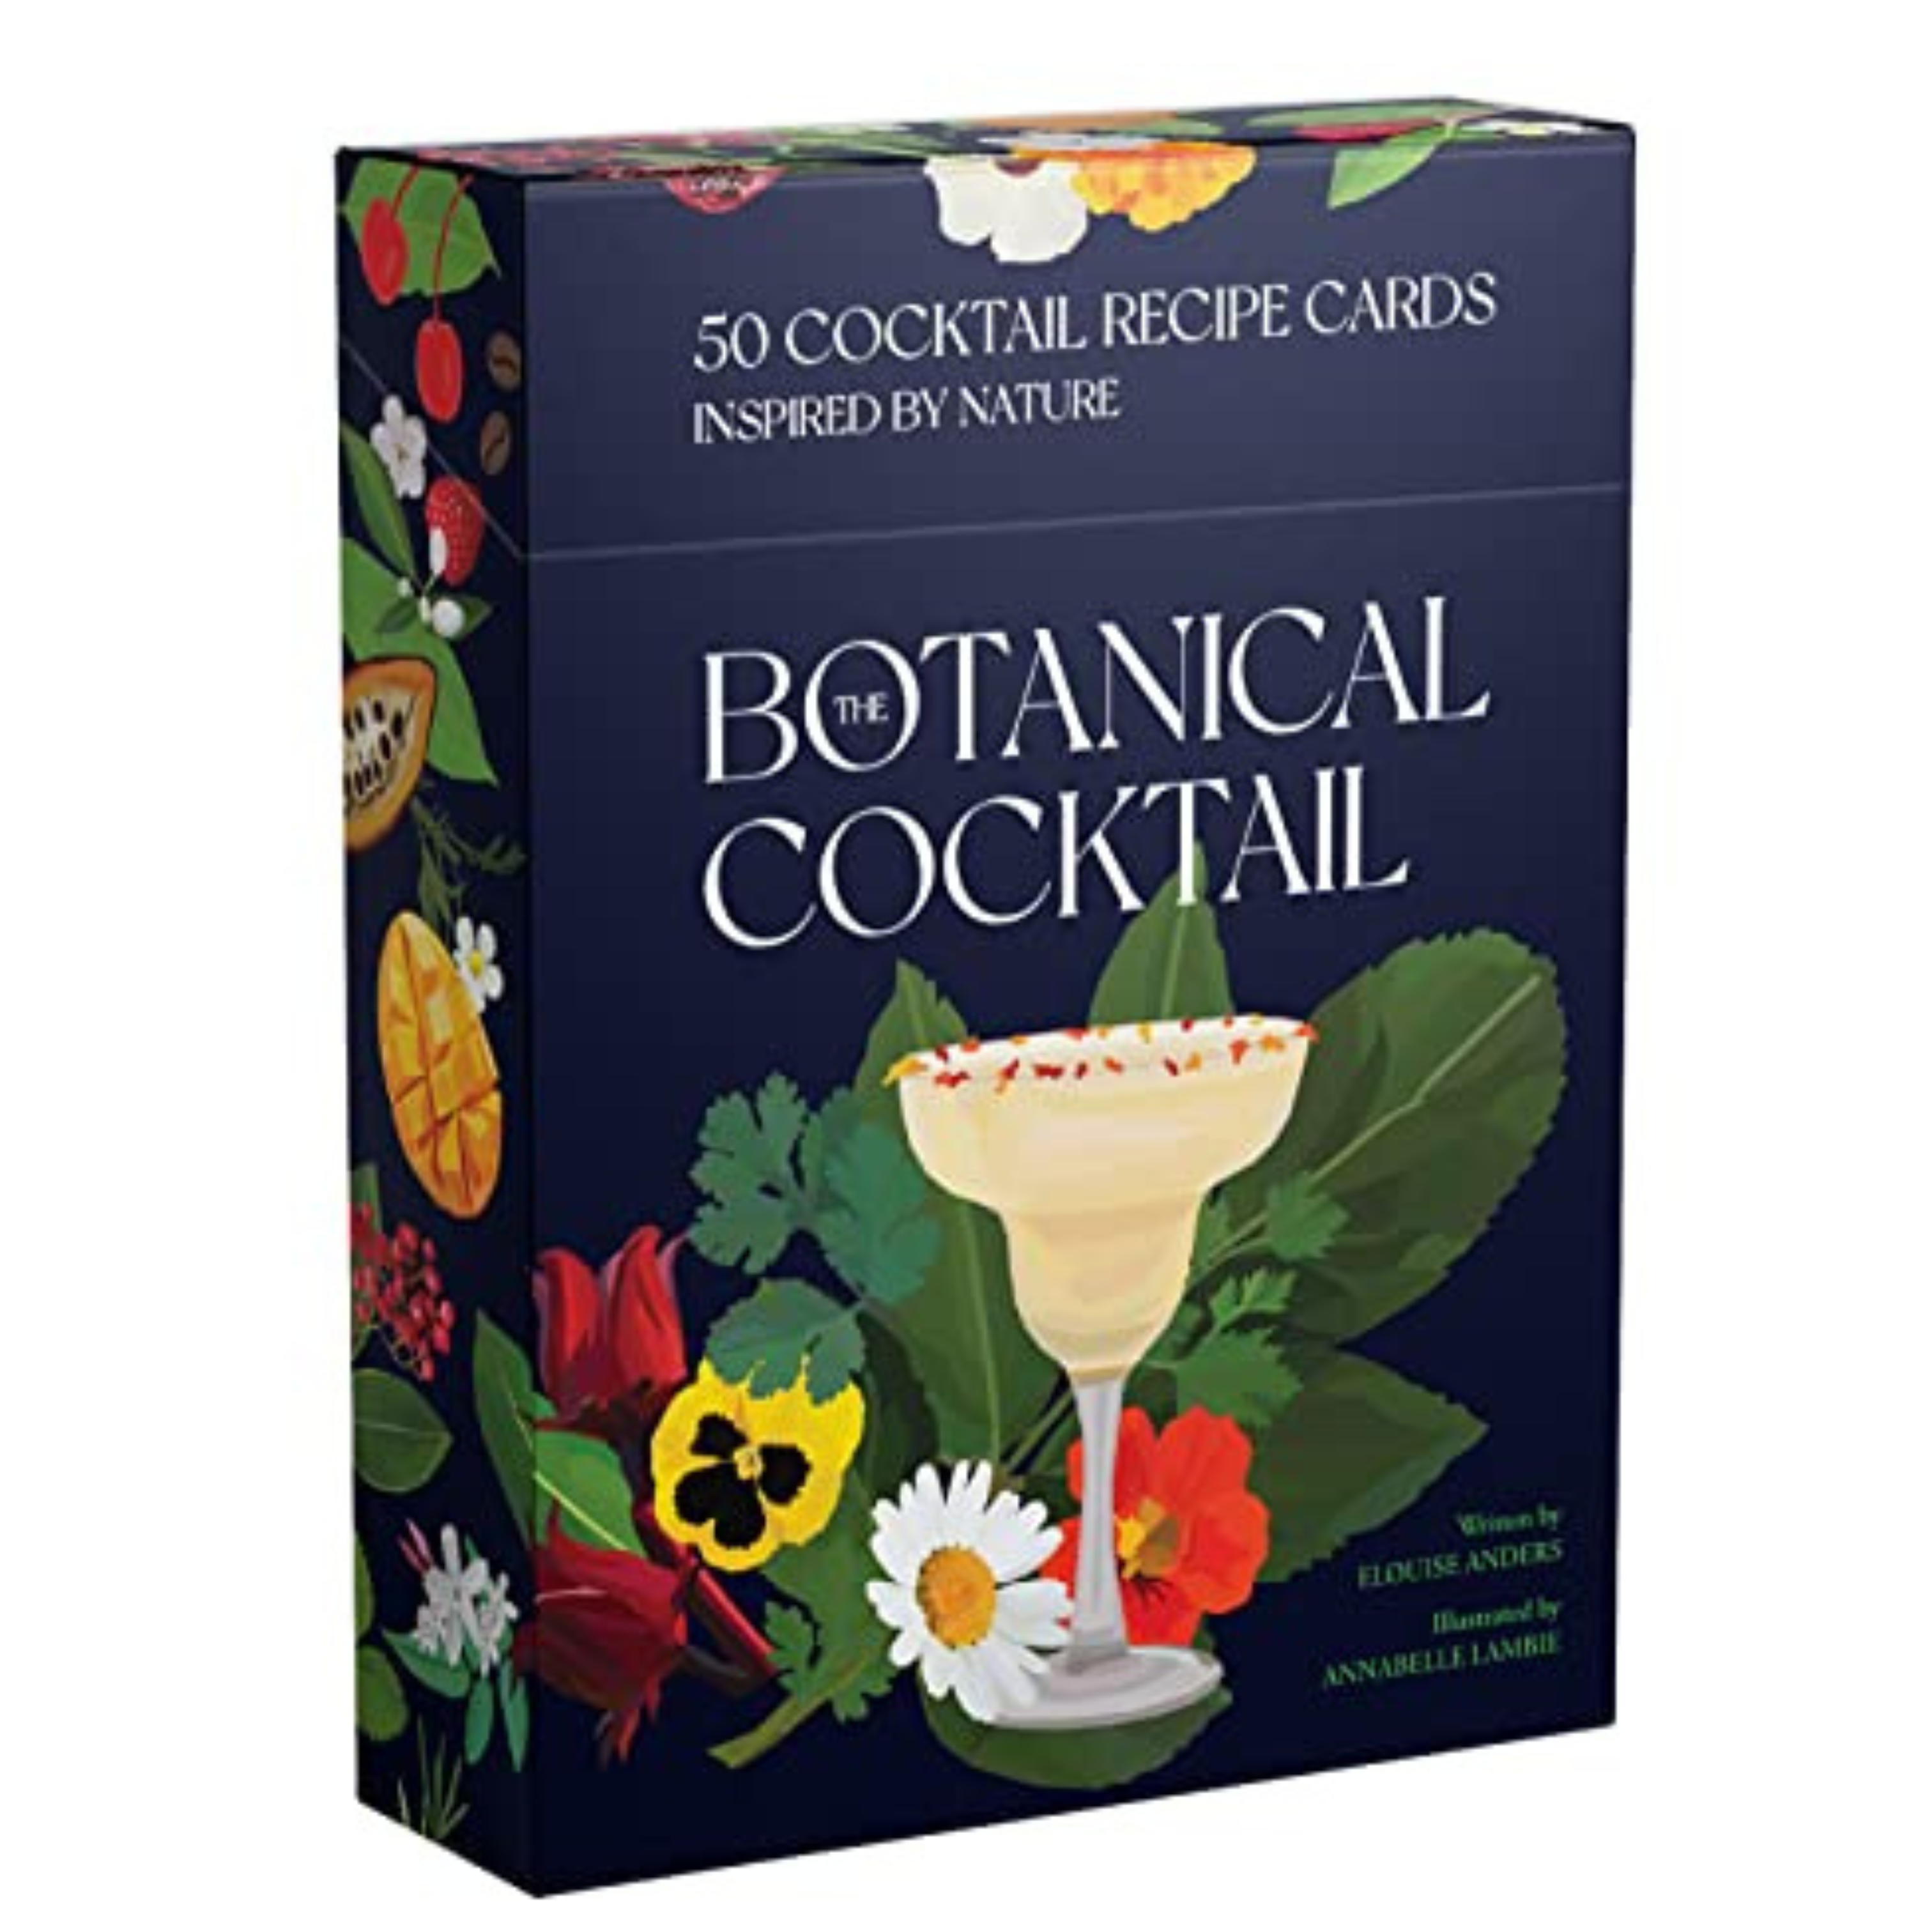 The Botanical Cocktail Deck of Cards